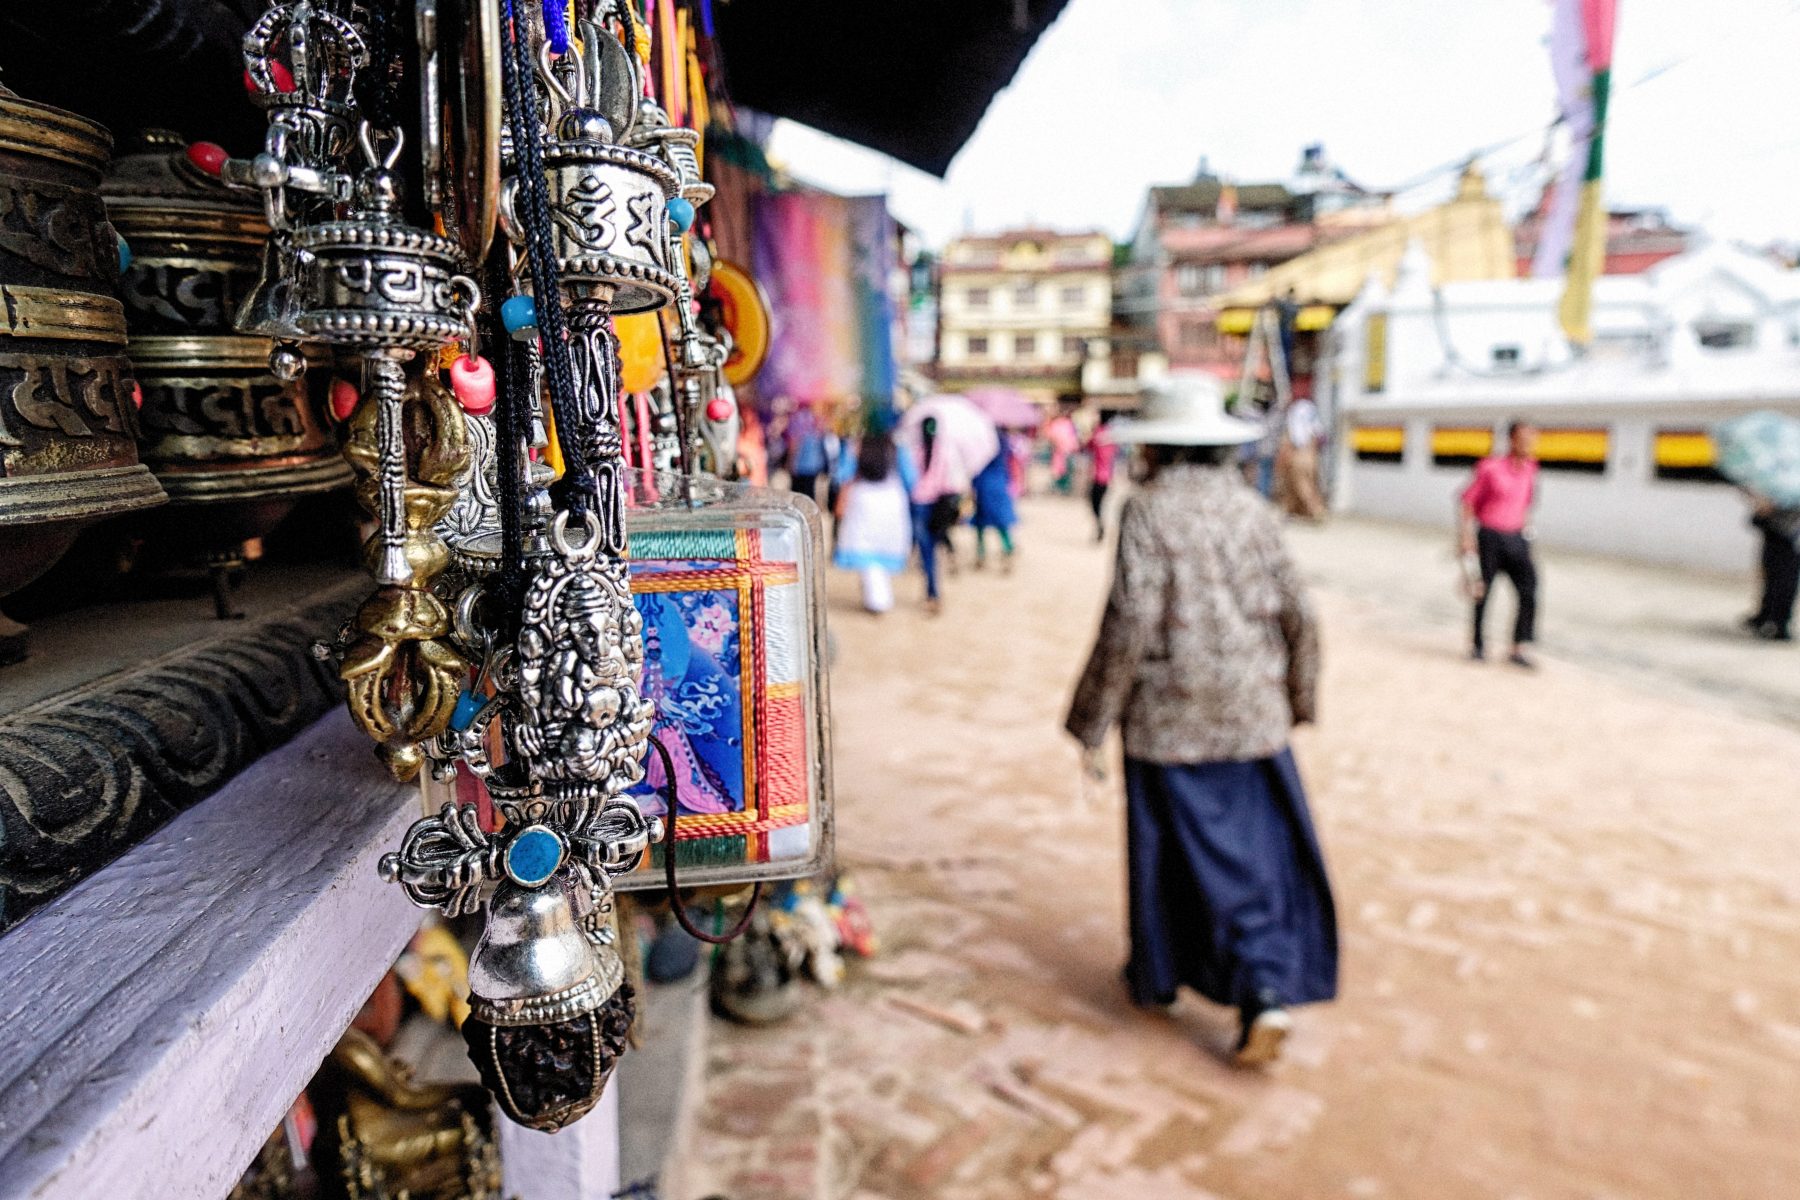 A street in a Nepalese market.